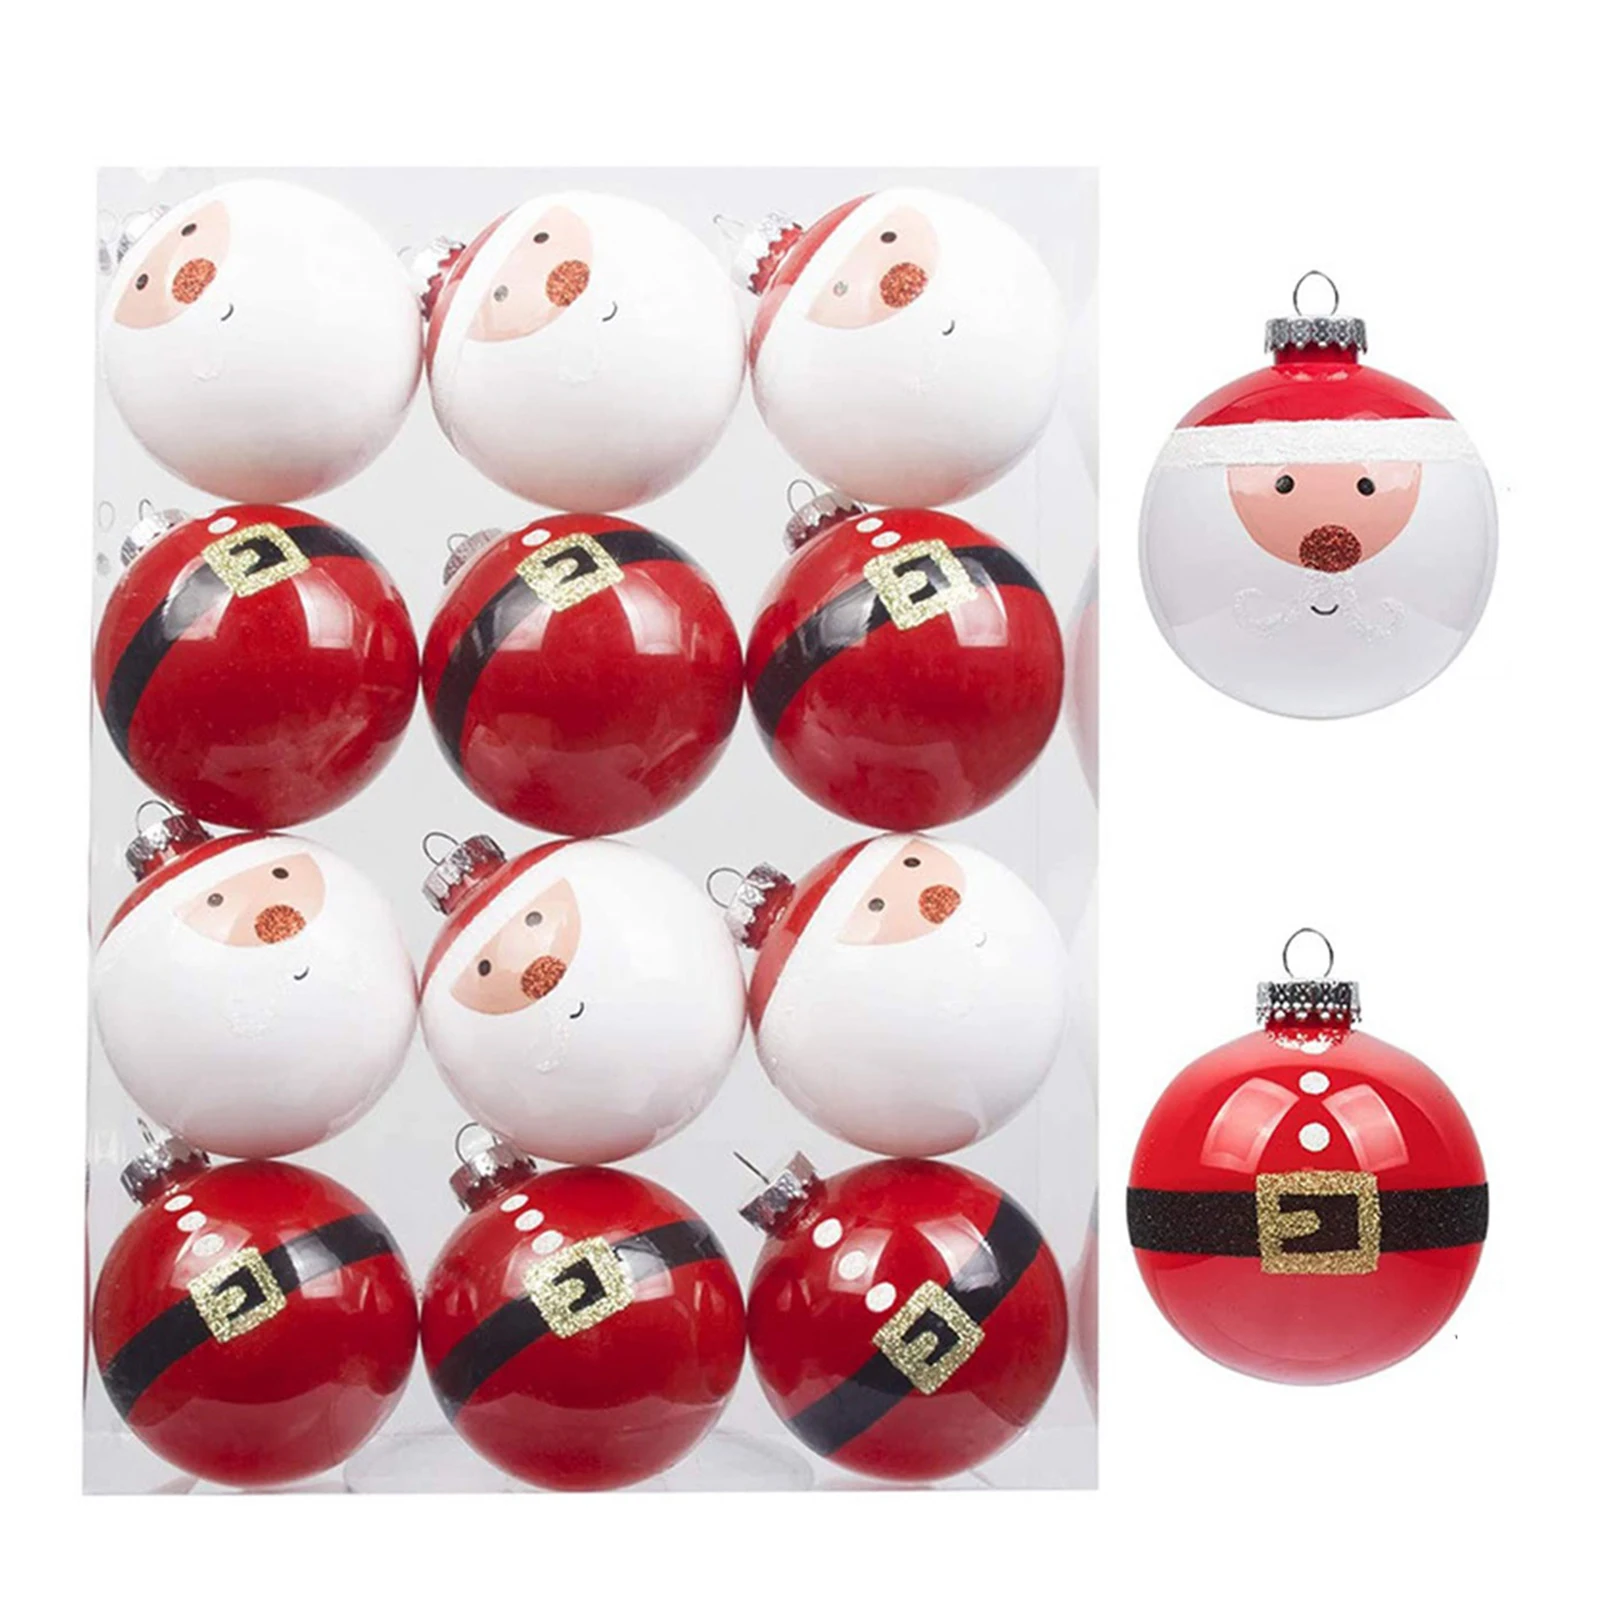 

Christmas Baubles Christmas Tree Decorations Ornaments Set 12pcs Christmas Balls Shatterproof Balls for Holiday Decoration for